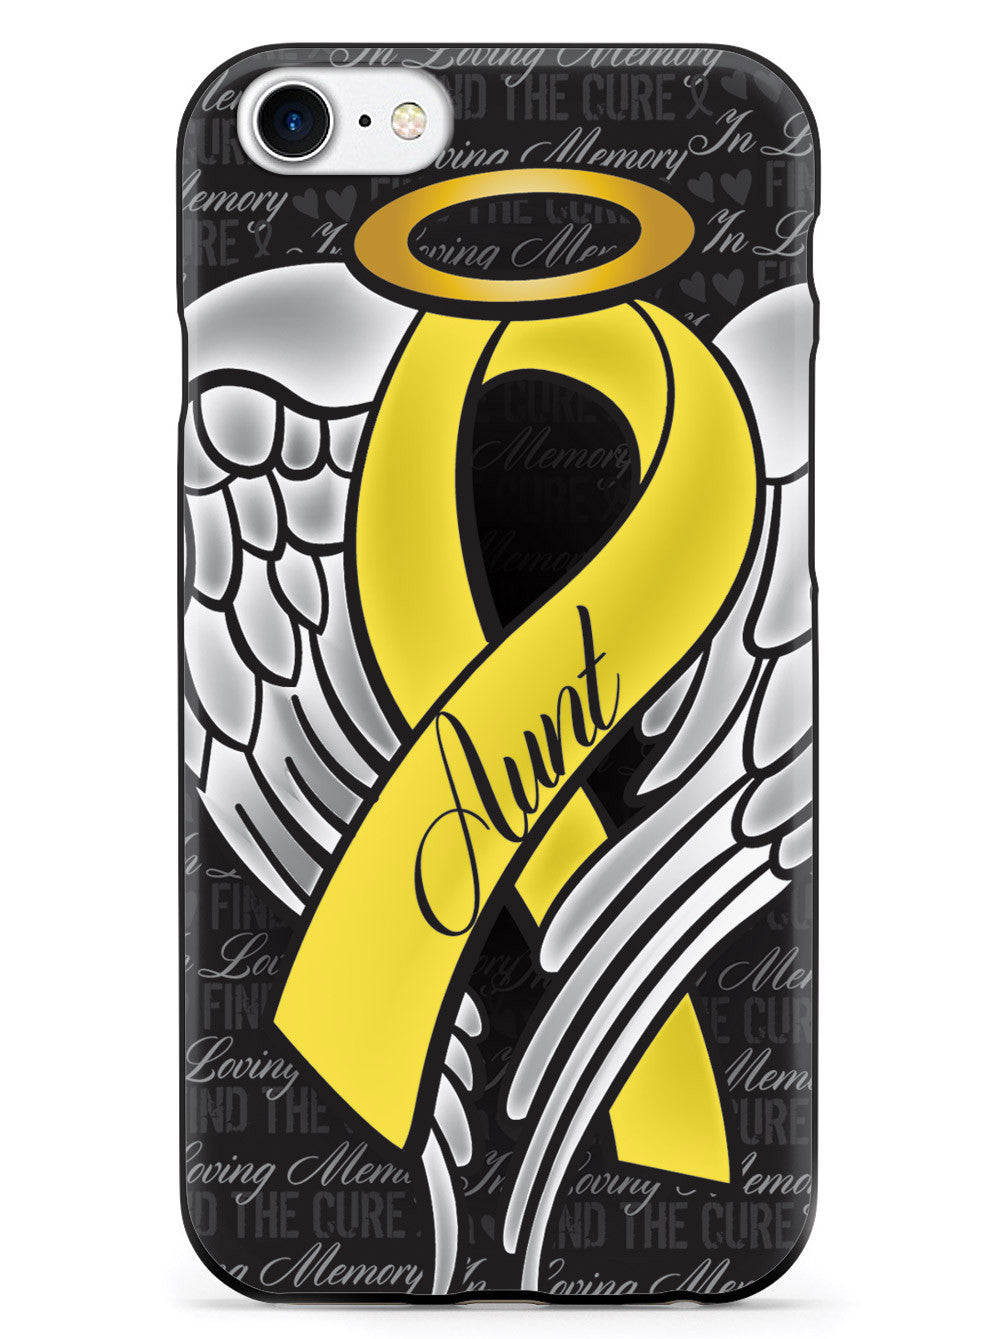 In Loving Memory of My Aunt - Yellow Ribbon Case